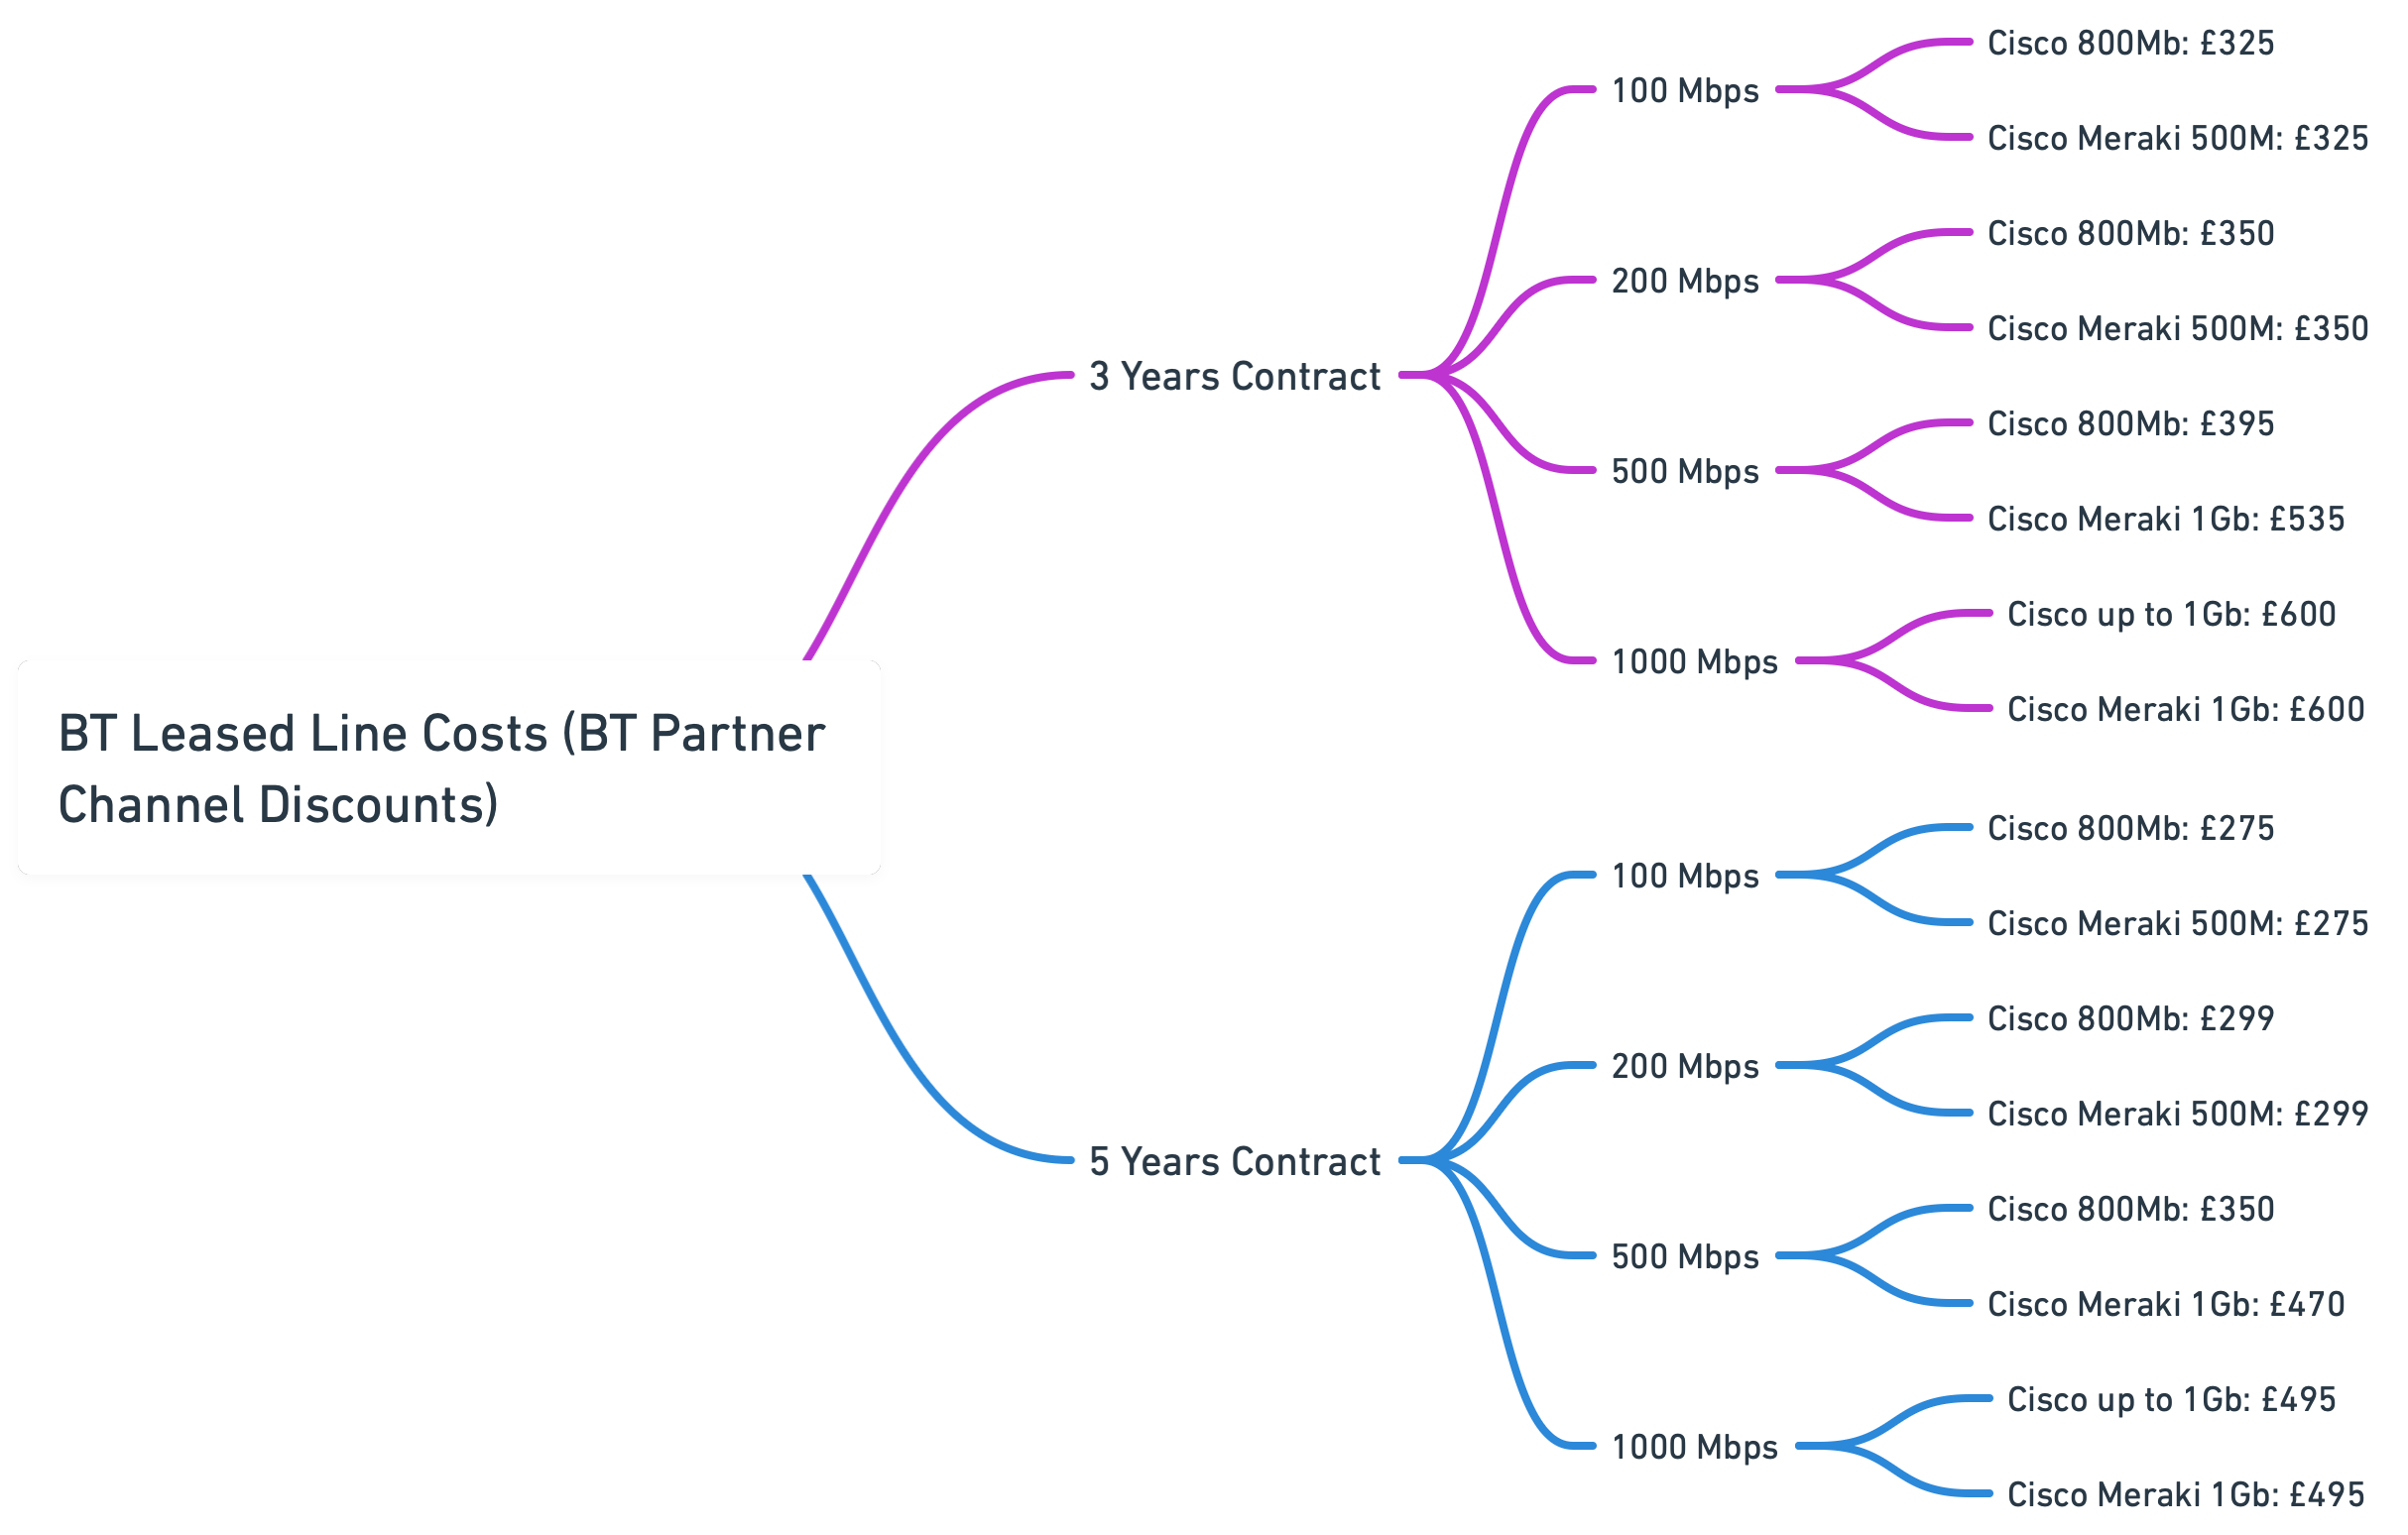 BT Leased Line Costs with Discounts (BT Partner Channel)@2x